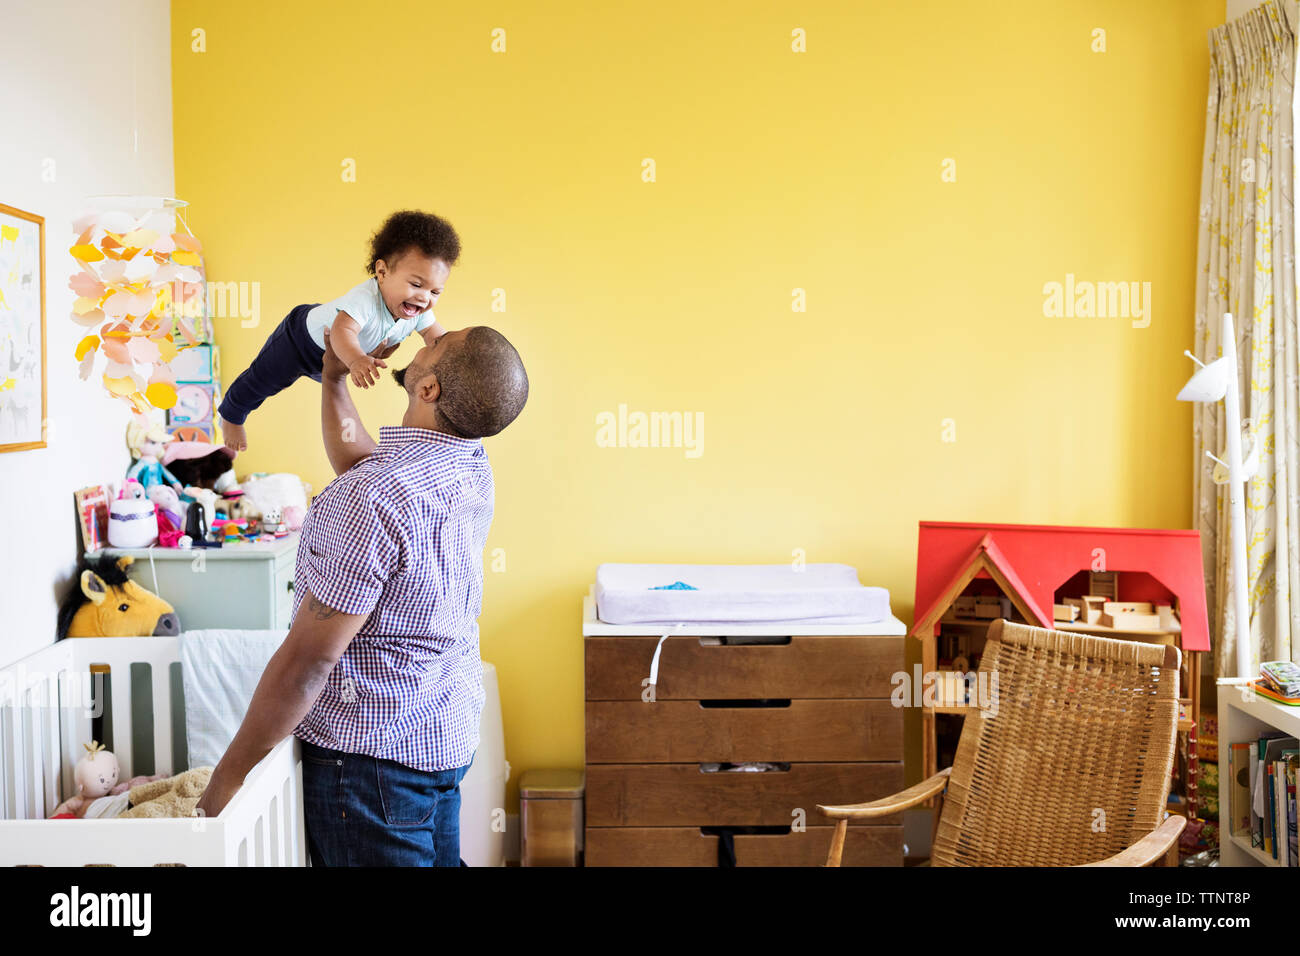 Playful man picking up son while standing at home Stock Photo